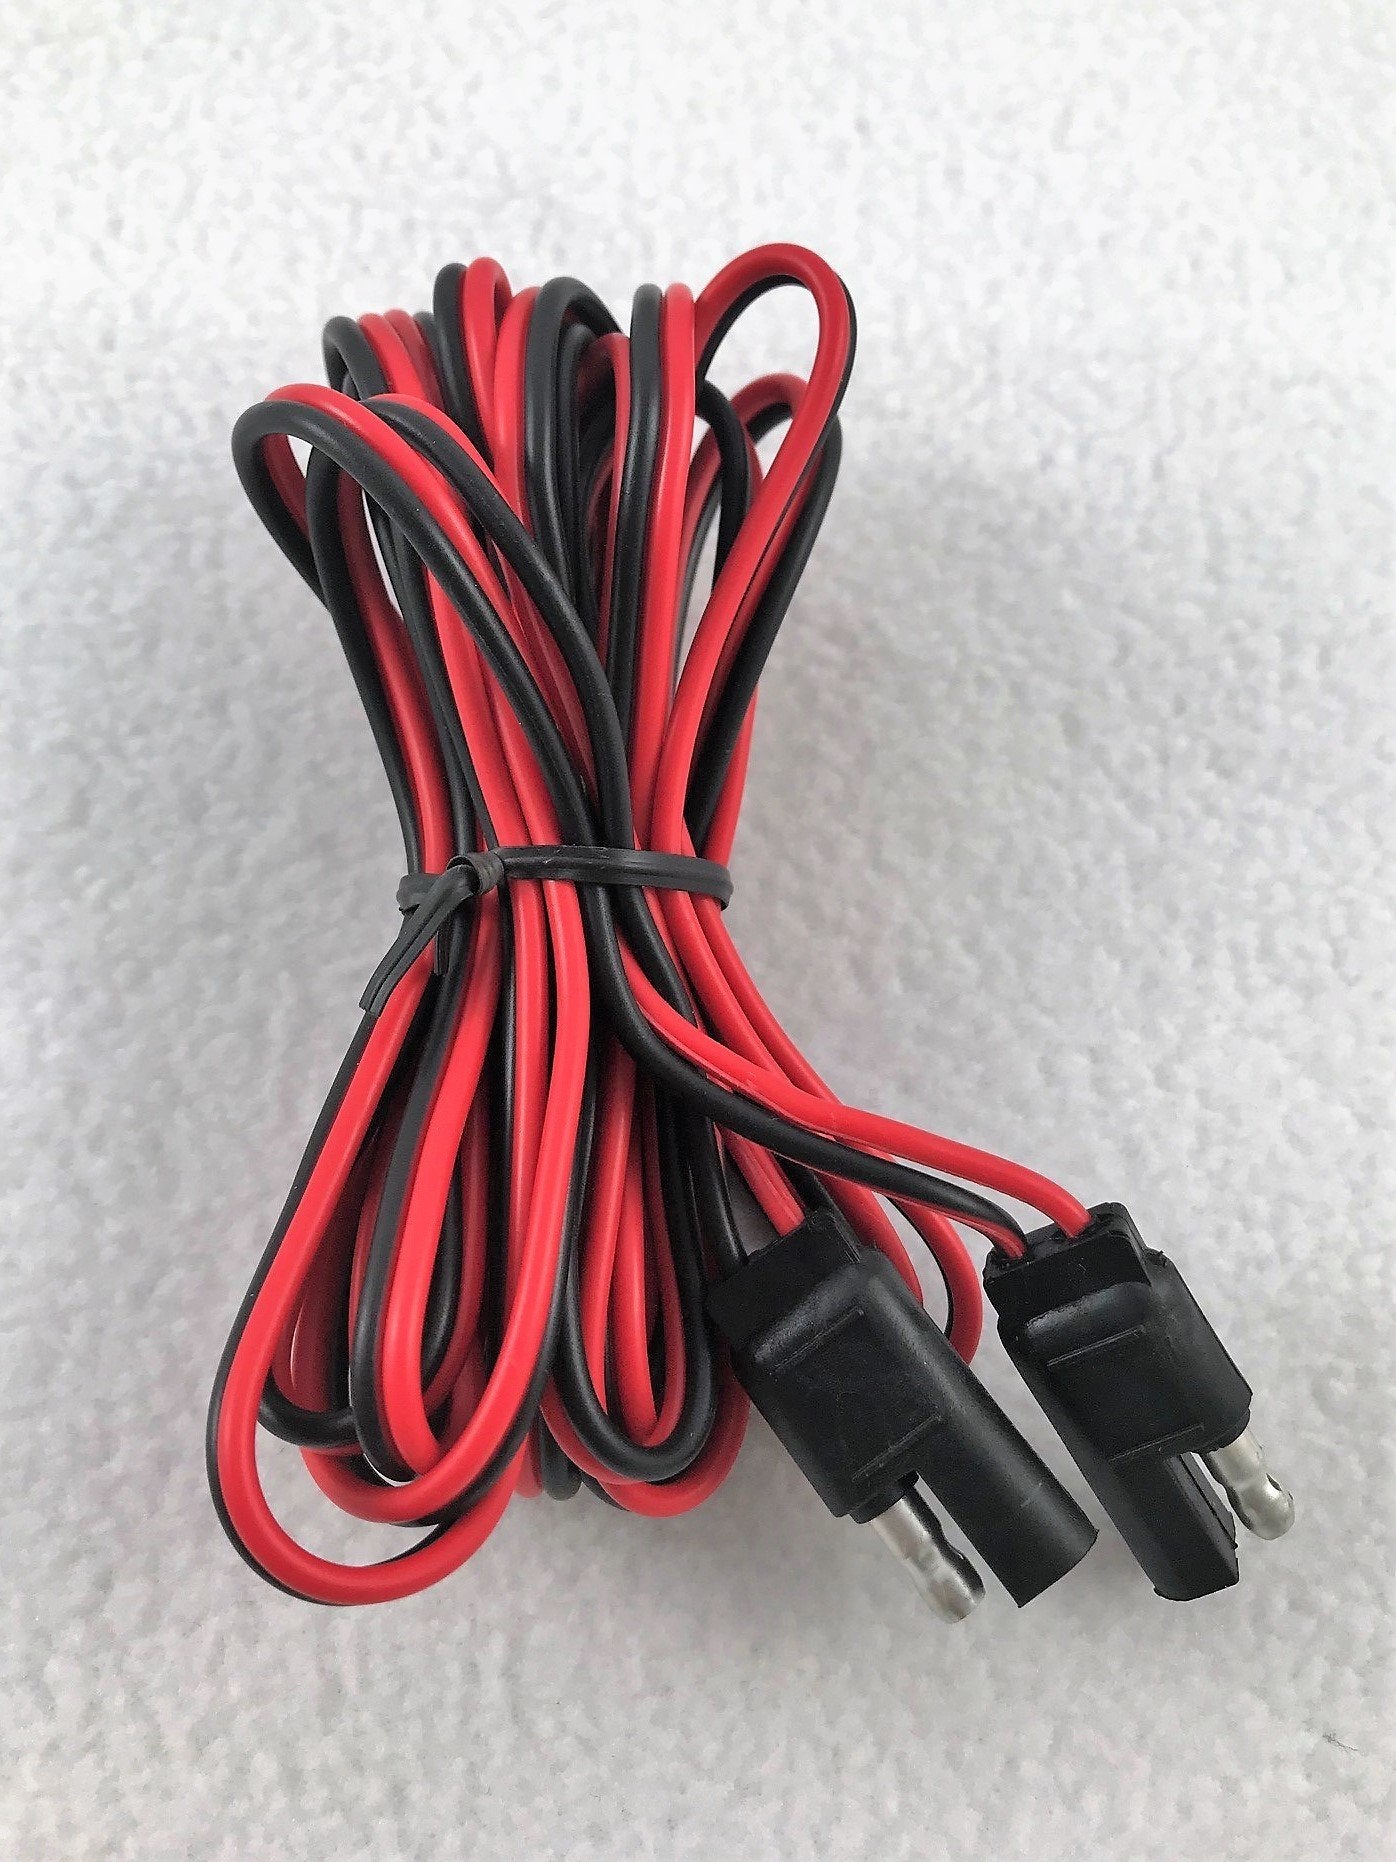 TrollMaster PRO3PLUS Extension Steering Cord - 10ft. - shop.cmpgroup.net